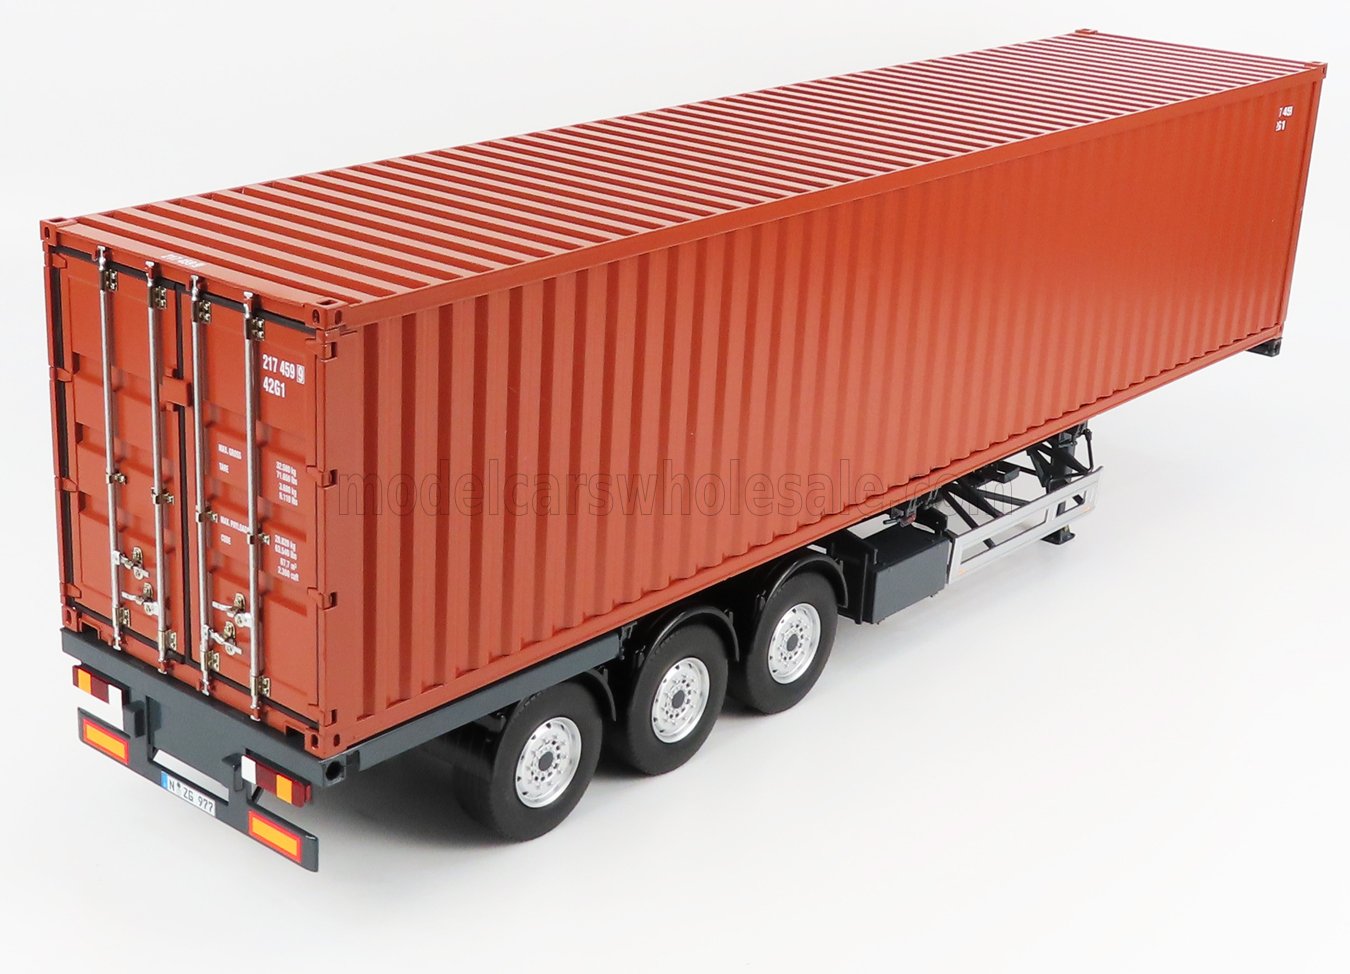 NZG - ACCESSORIES - TRAILER FOR TRUCK WITH EUROPEAN SEA-CONTAINER 40"